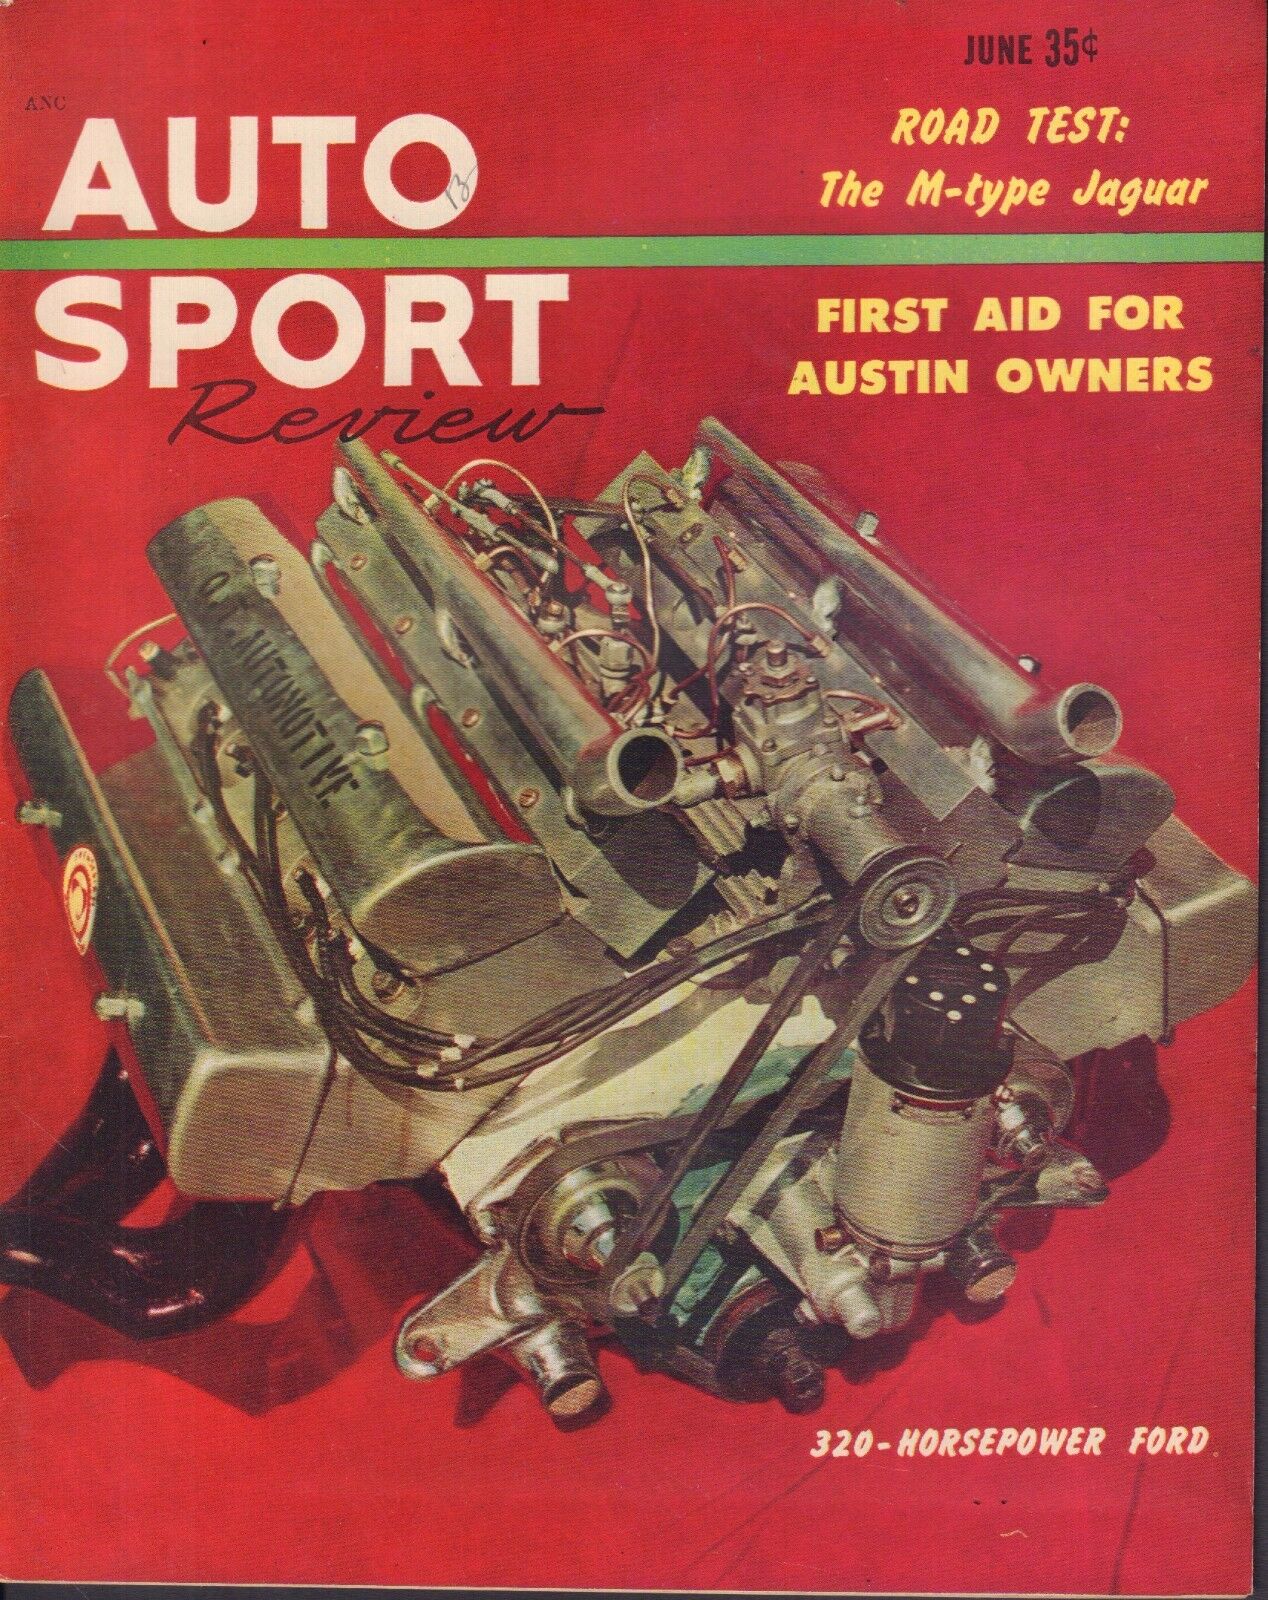 Auto Sport Review # 2, June 1953 magazine back issue Auto Sport Review magizine back copy Auto Sport Review # 2, June 1953 Car Racing Auto Mobile Magazine Back Issue Published by Motorsport. Road Test: The M Type Jaguar.